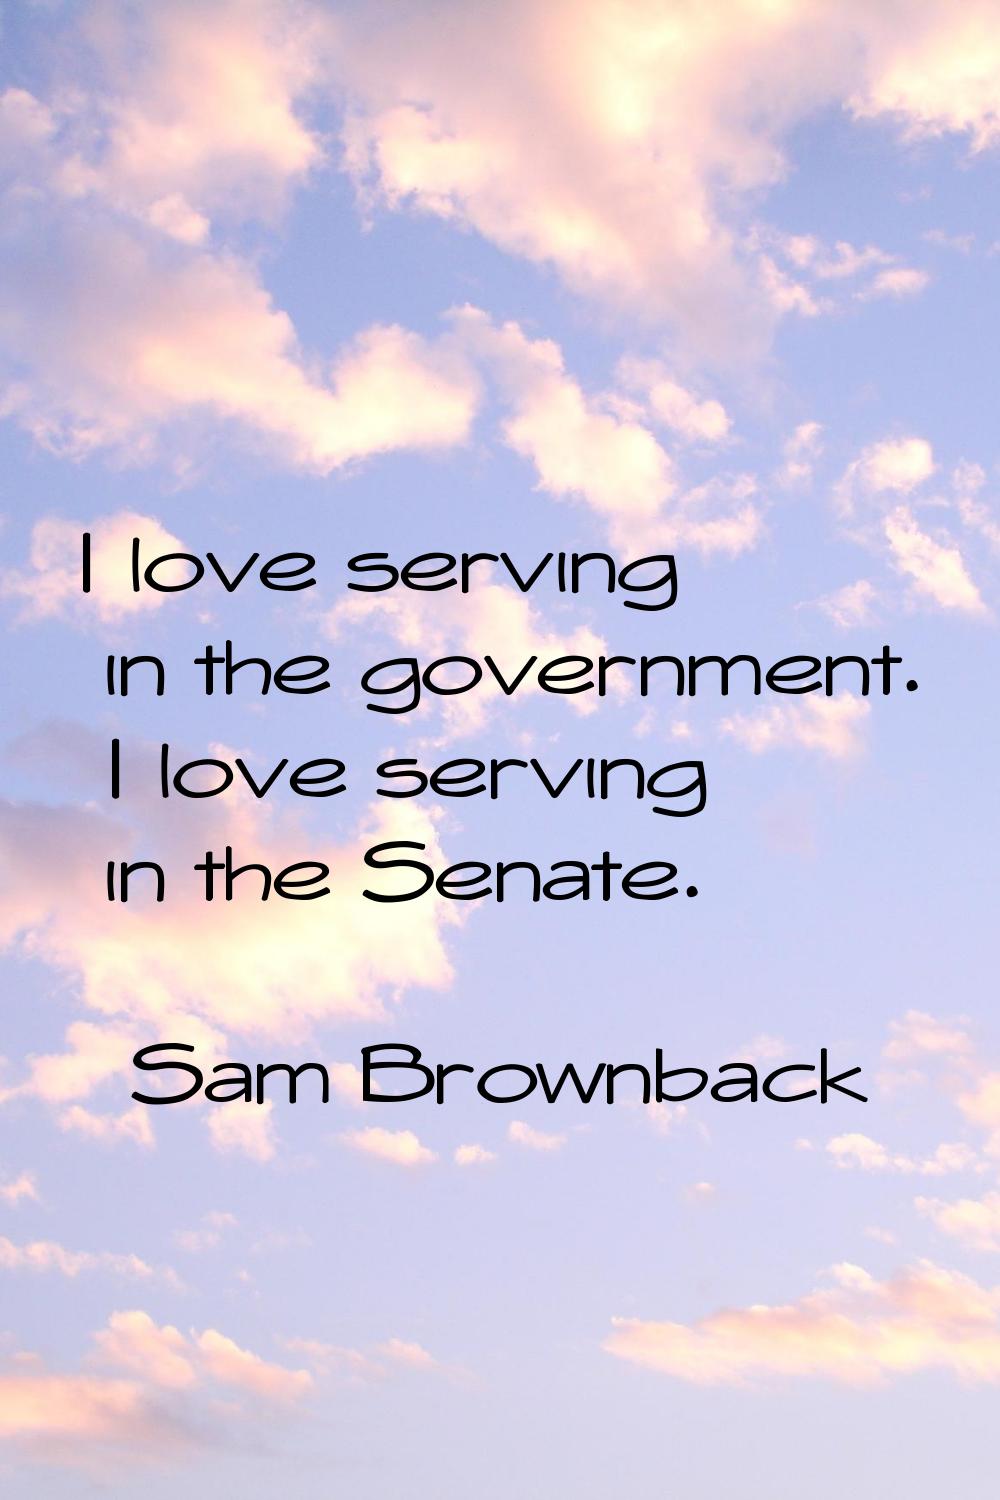 I love serving in the government. I love serving in the Senate.